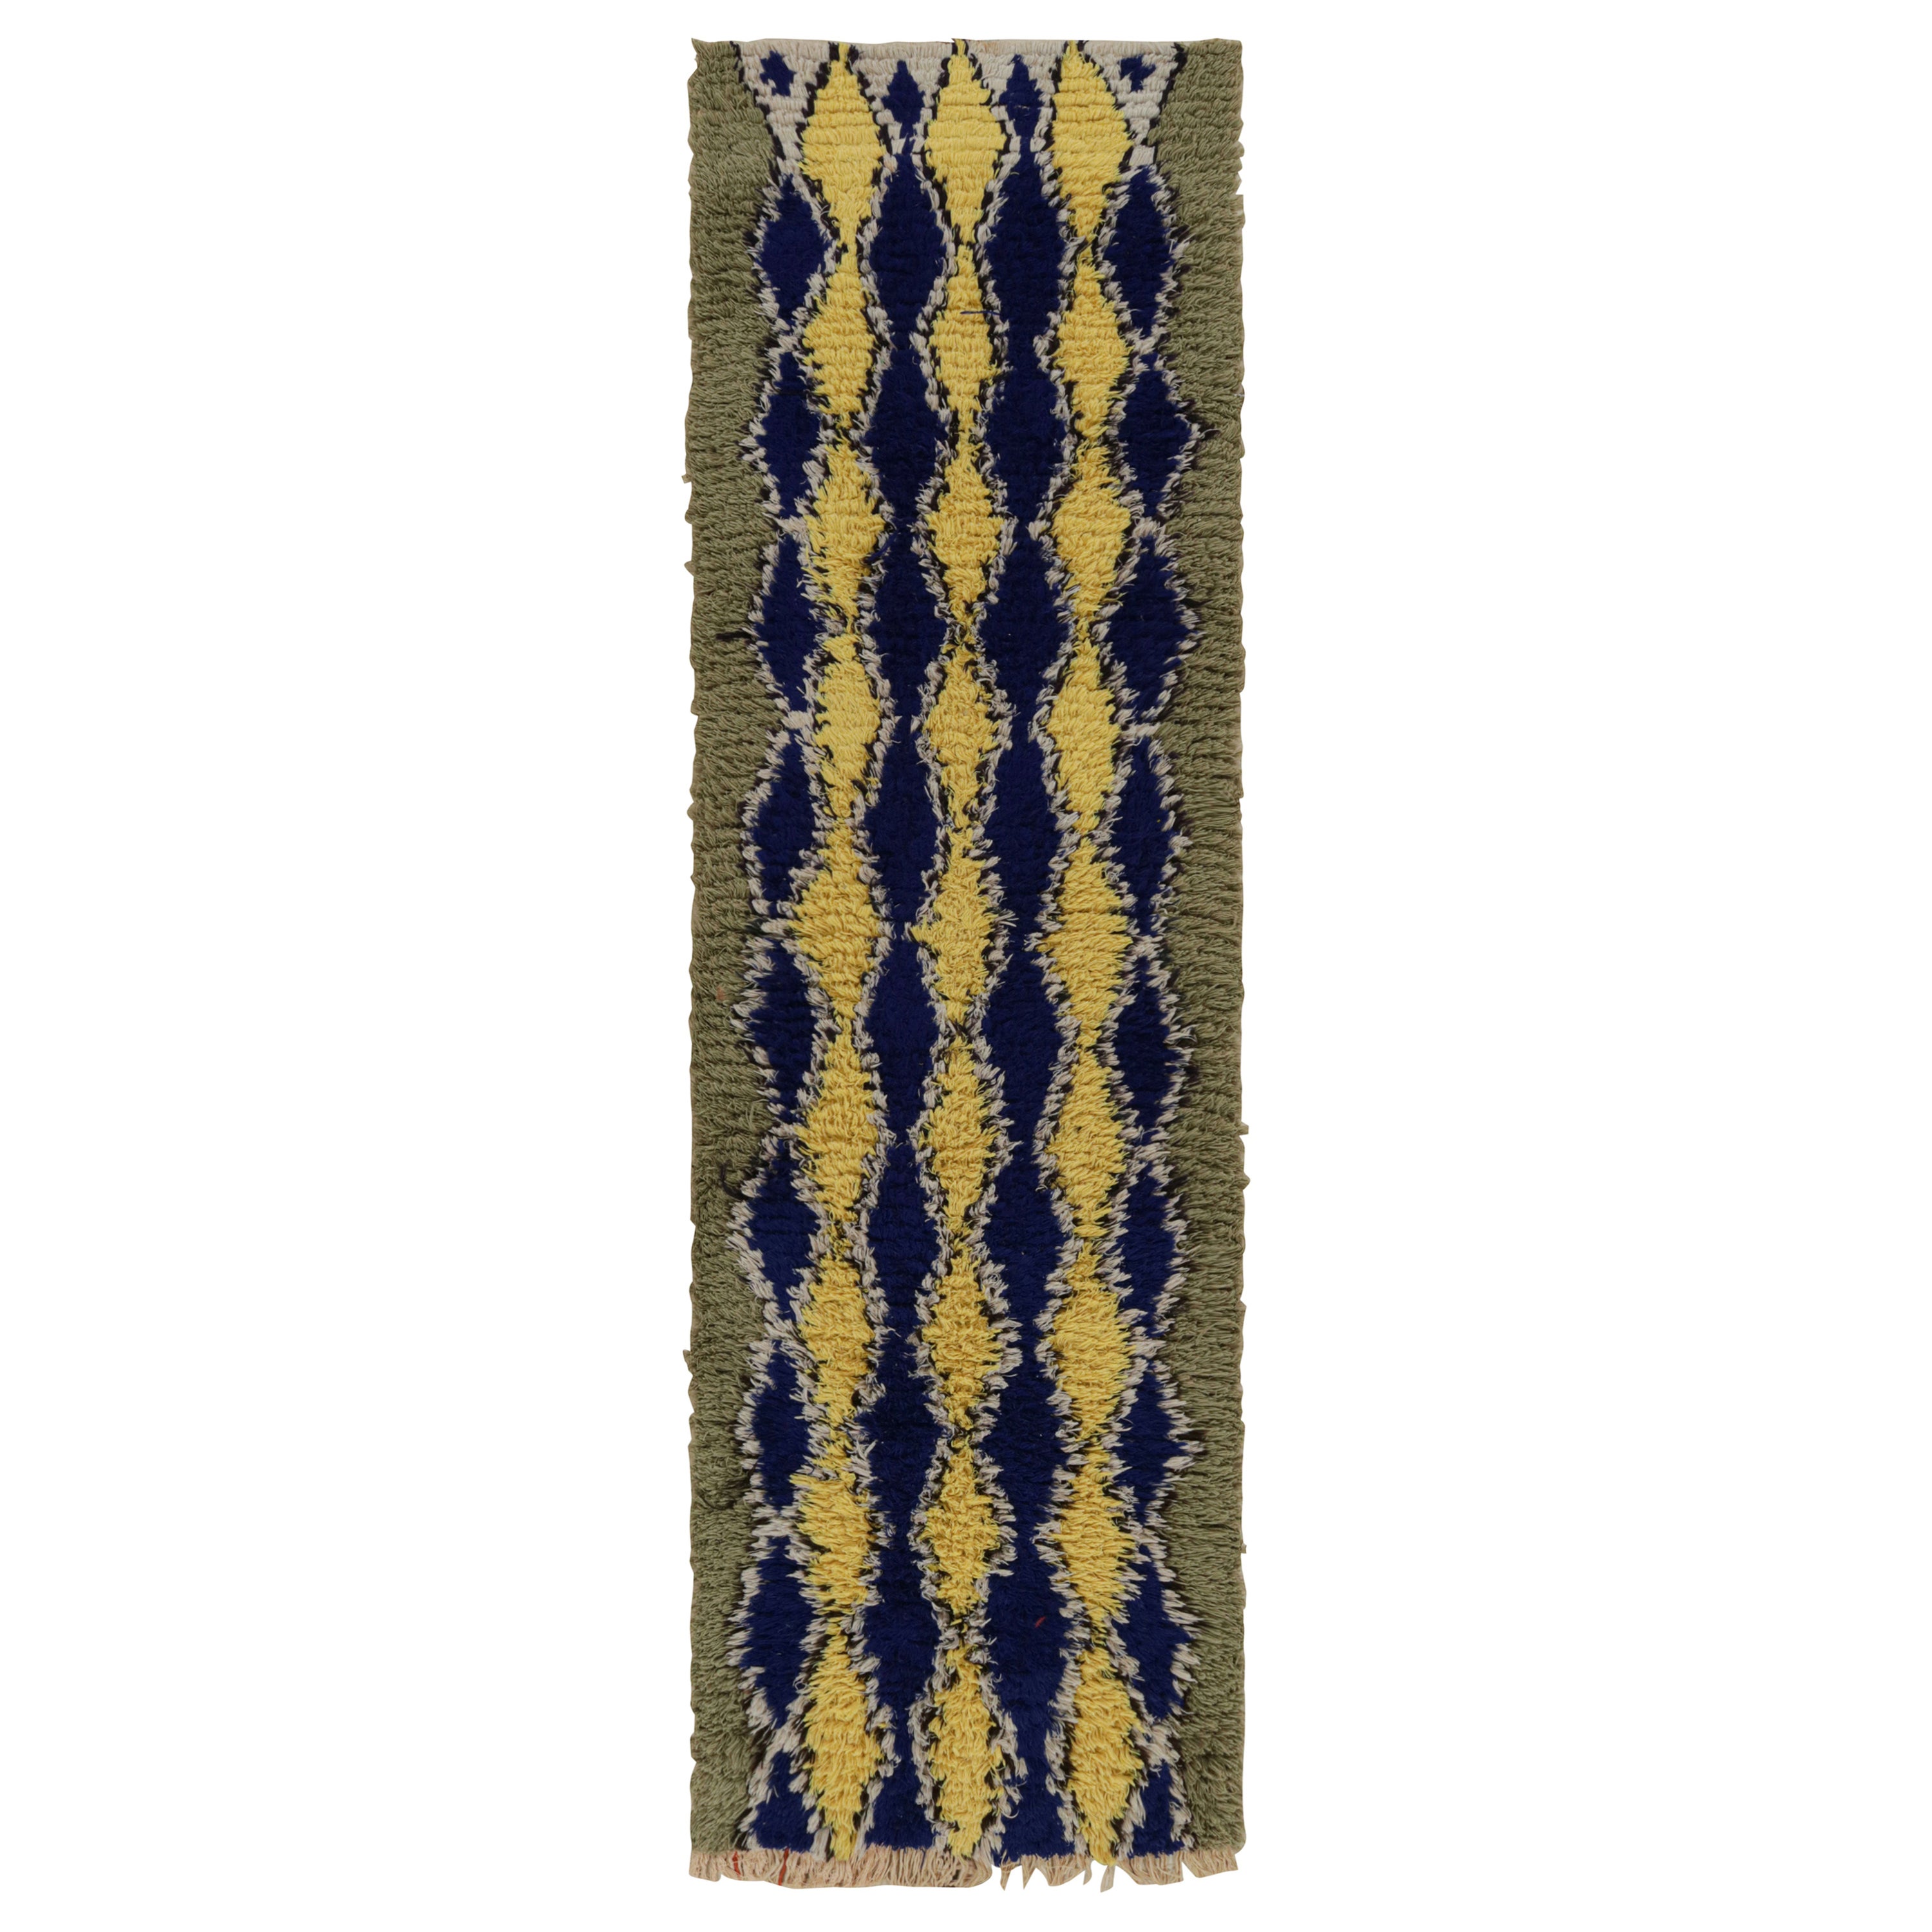 Vintage Moroccan Runner Rug with Blue and Yellow Diamonds, from Rug & Kilim For Sale